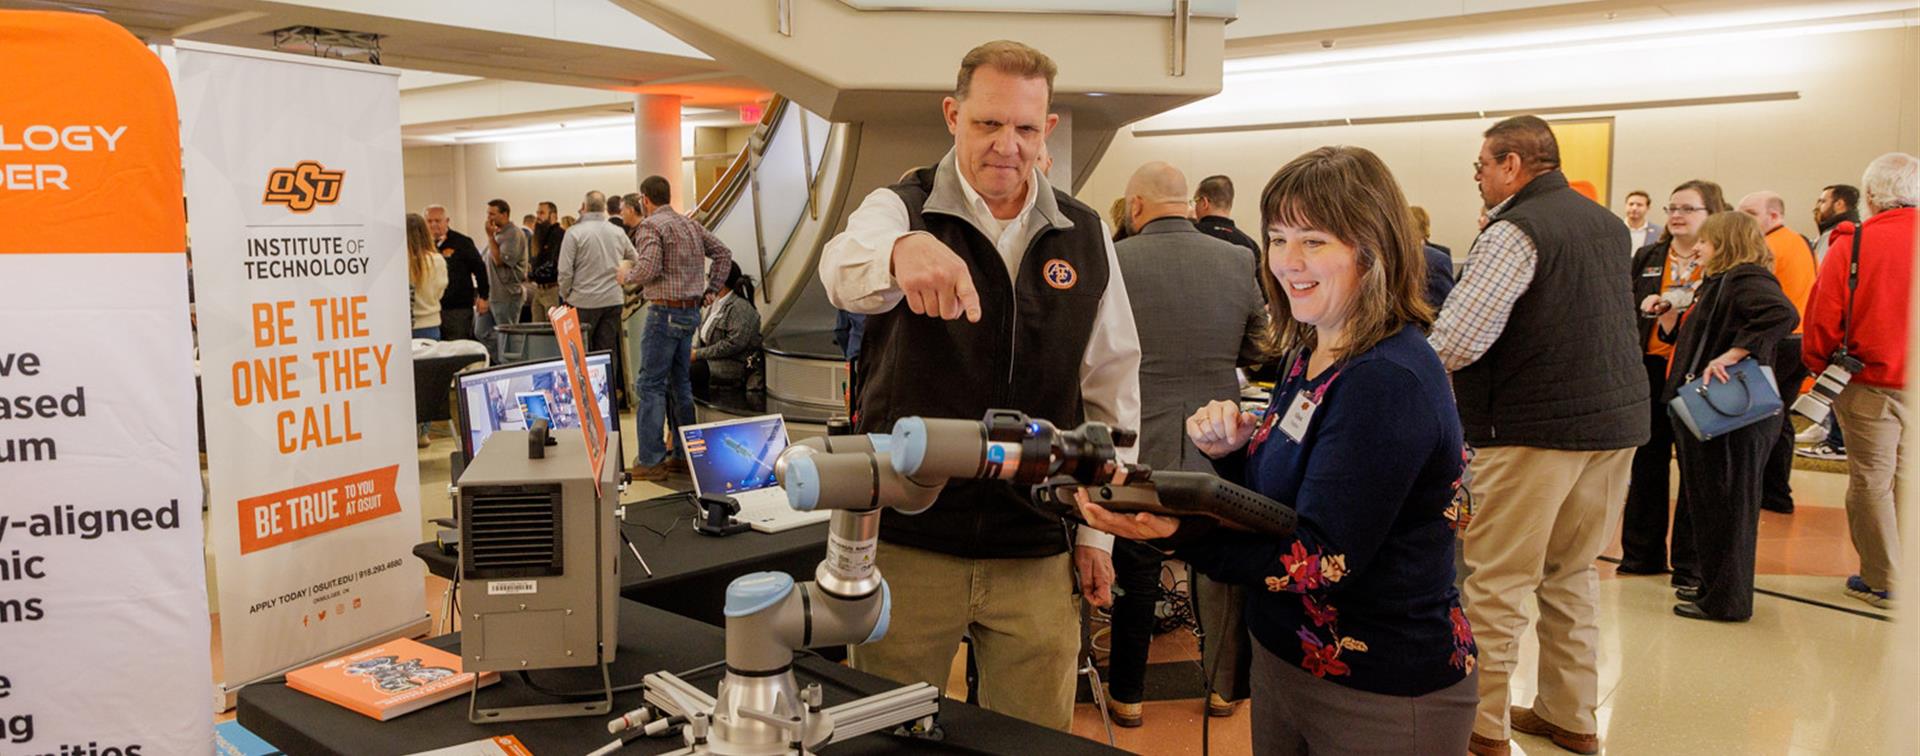 Photo of two people at a booth demonstrating robotic technology